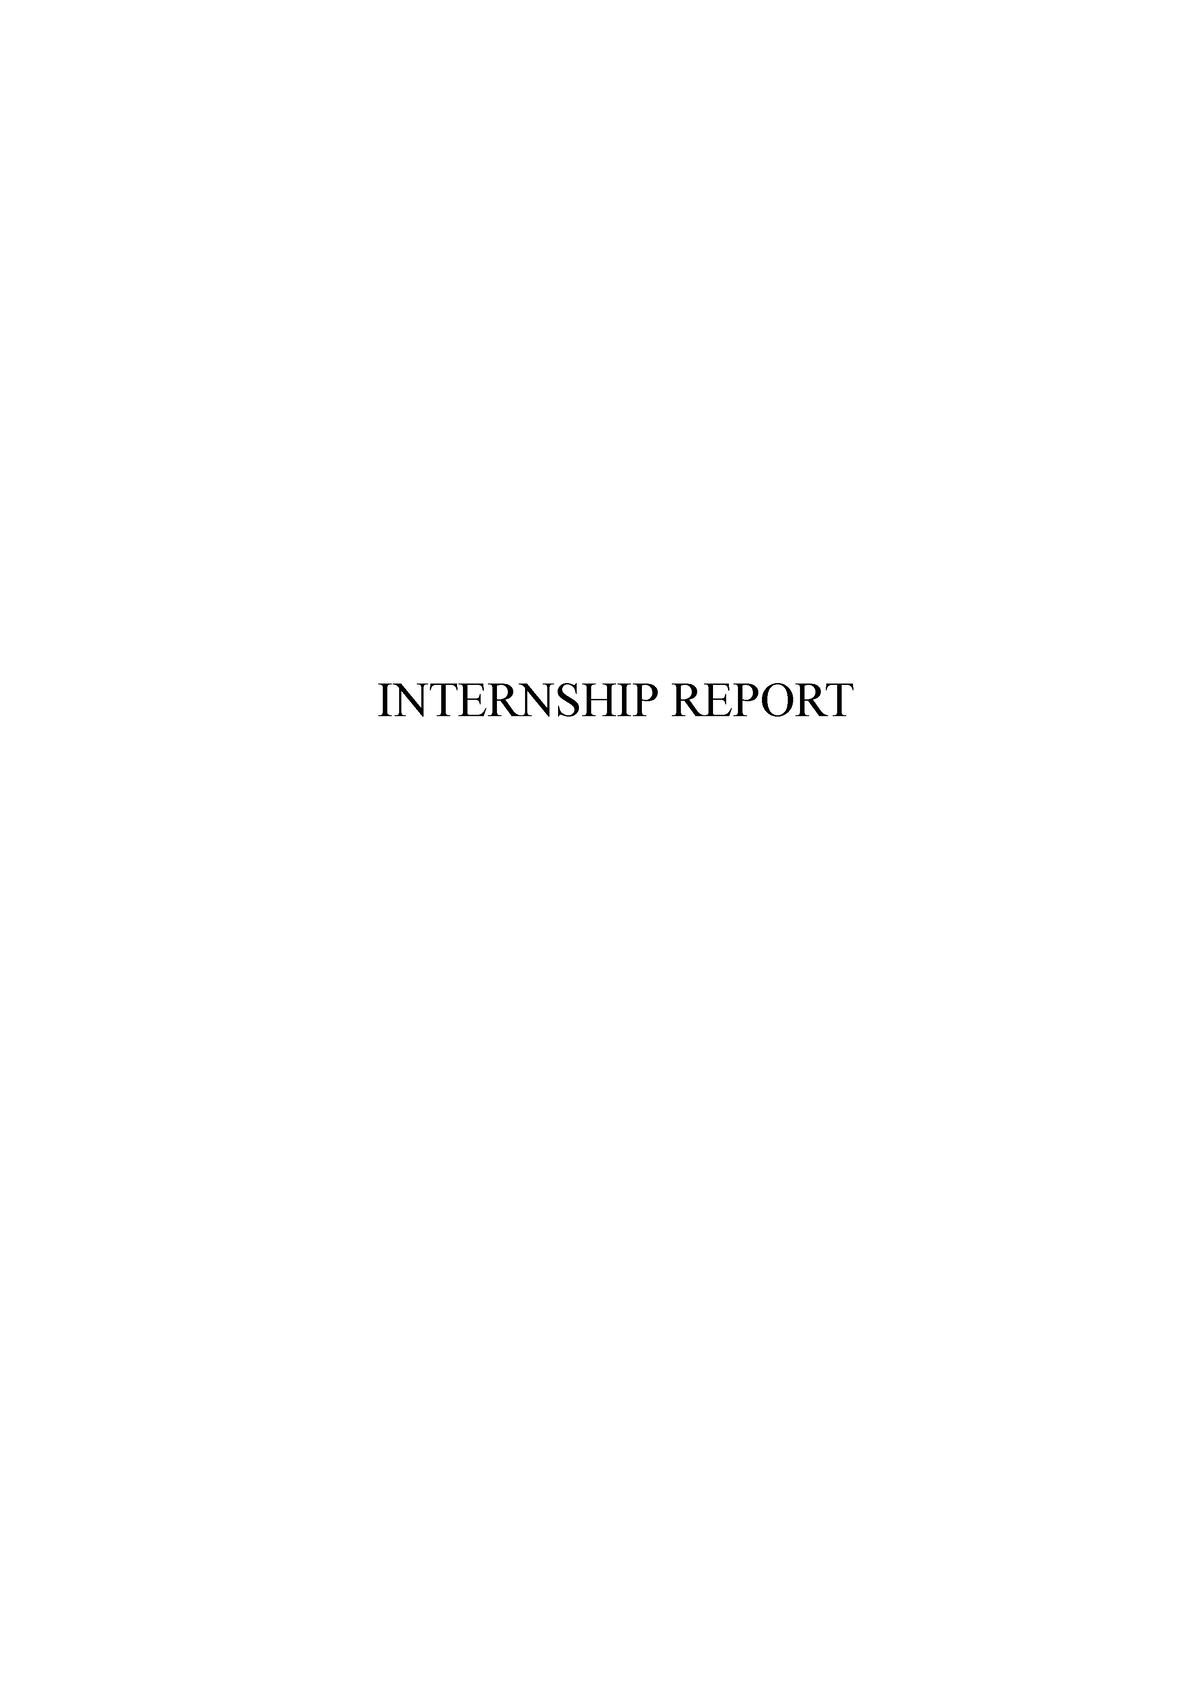 industrial visit report by computer engineering students